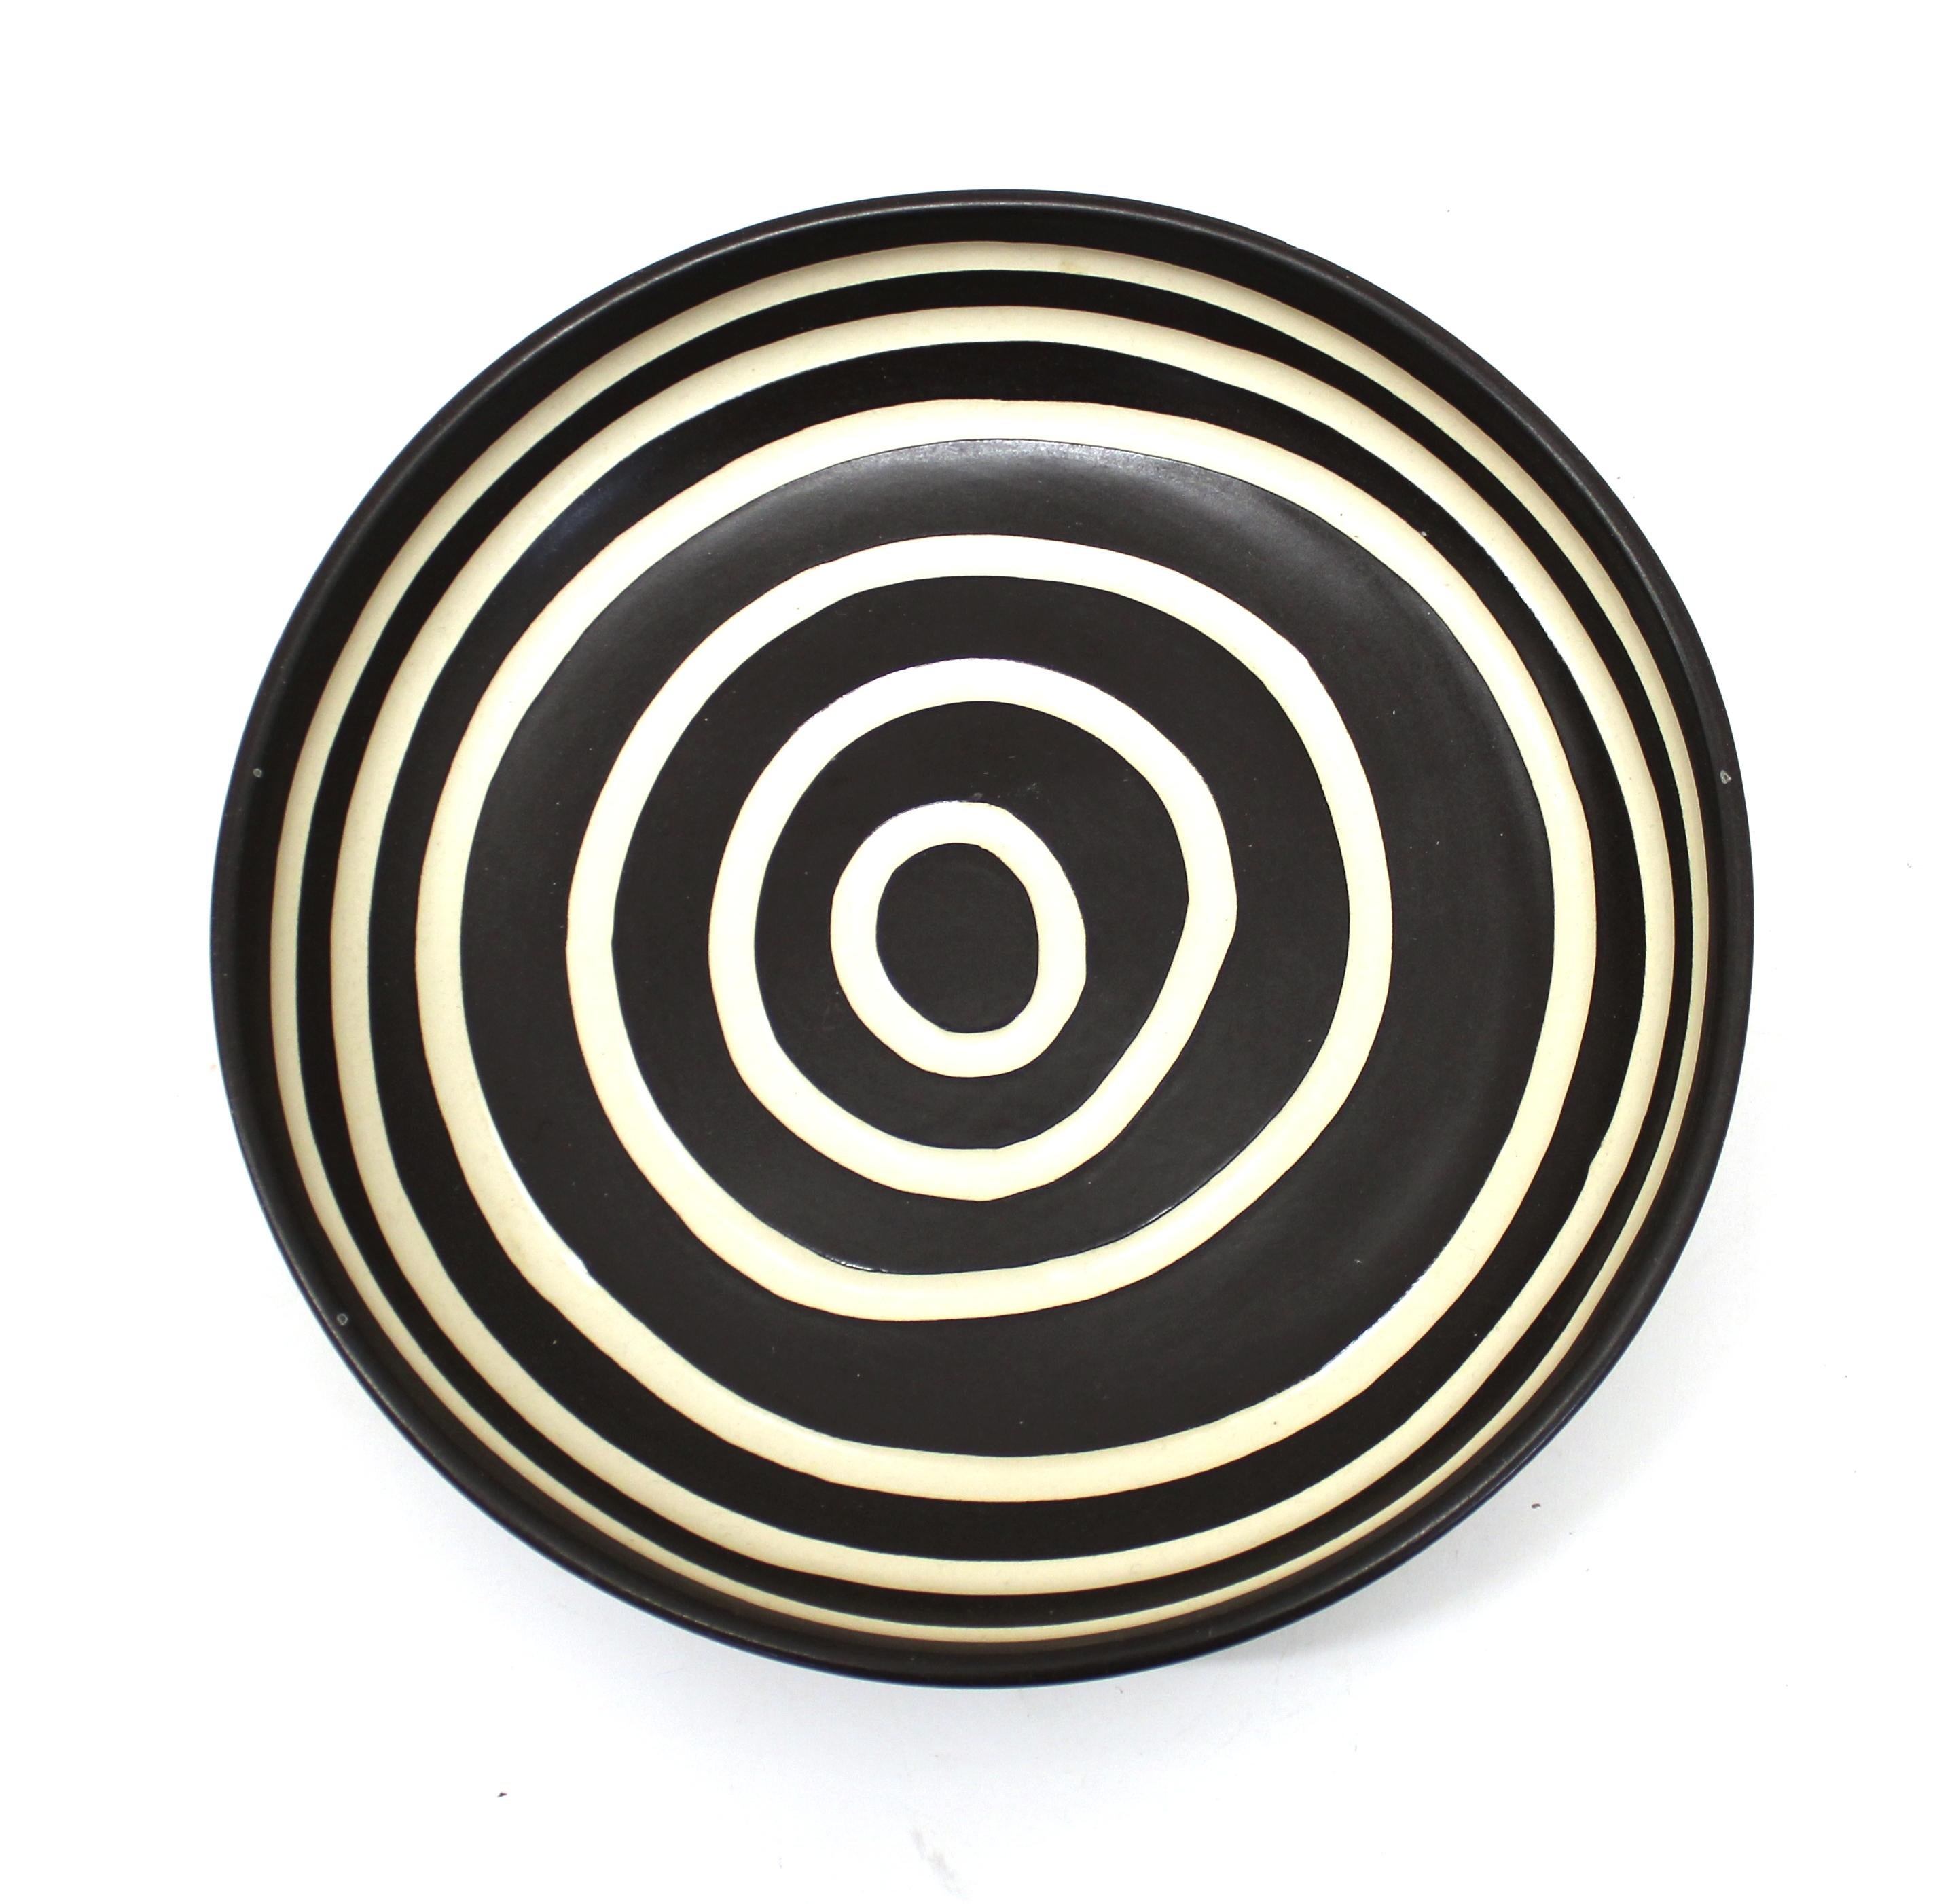 Postmodern studio pottery charger plate with concentric circles, marked on the bottom.